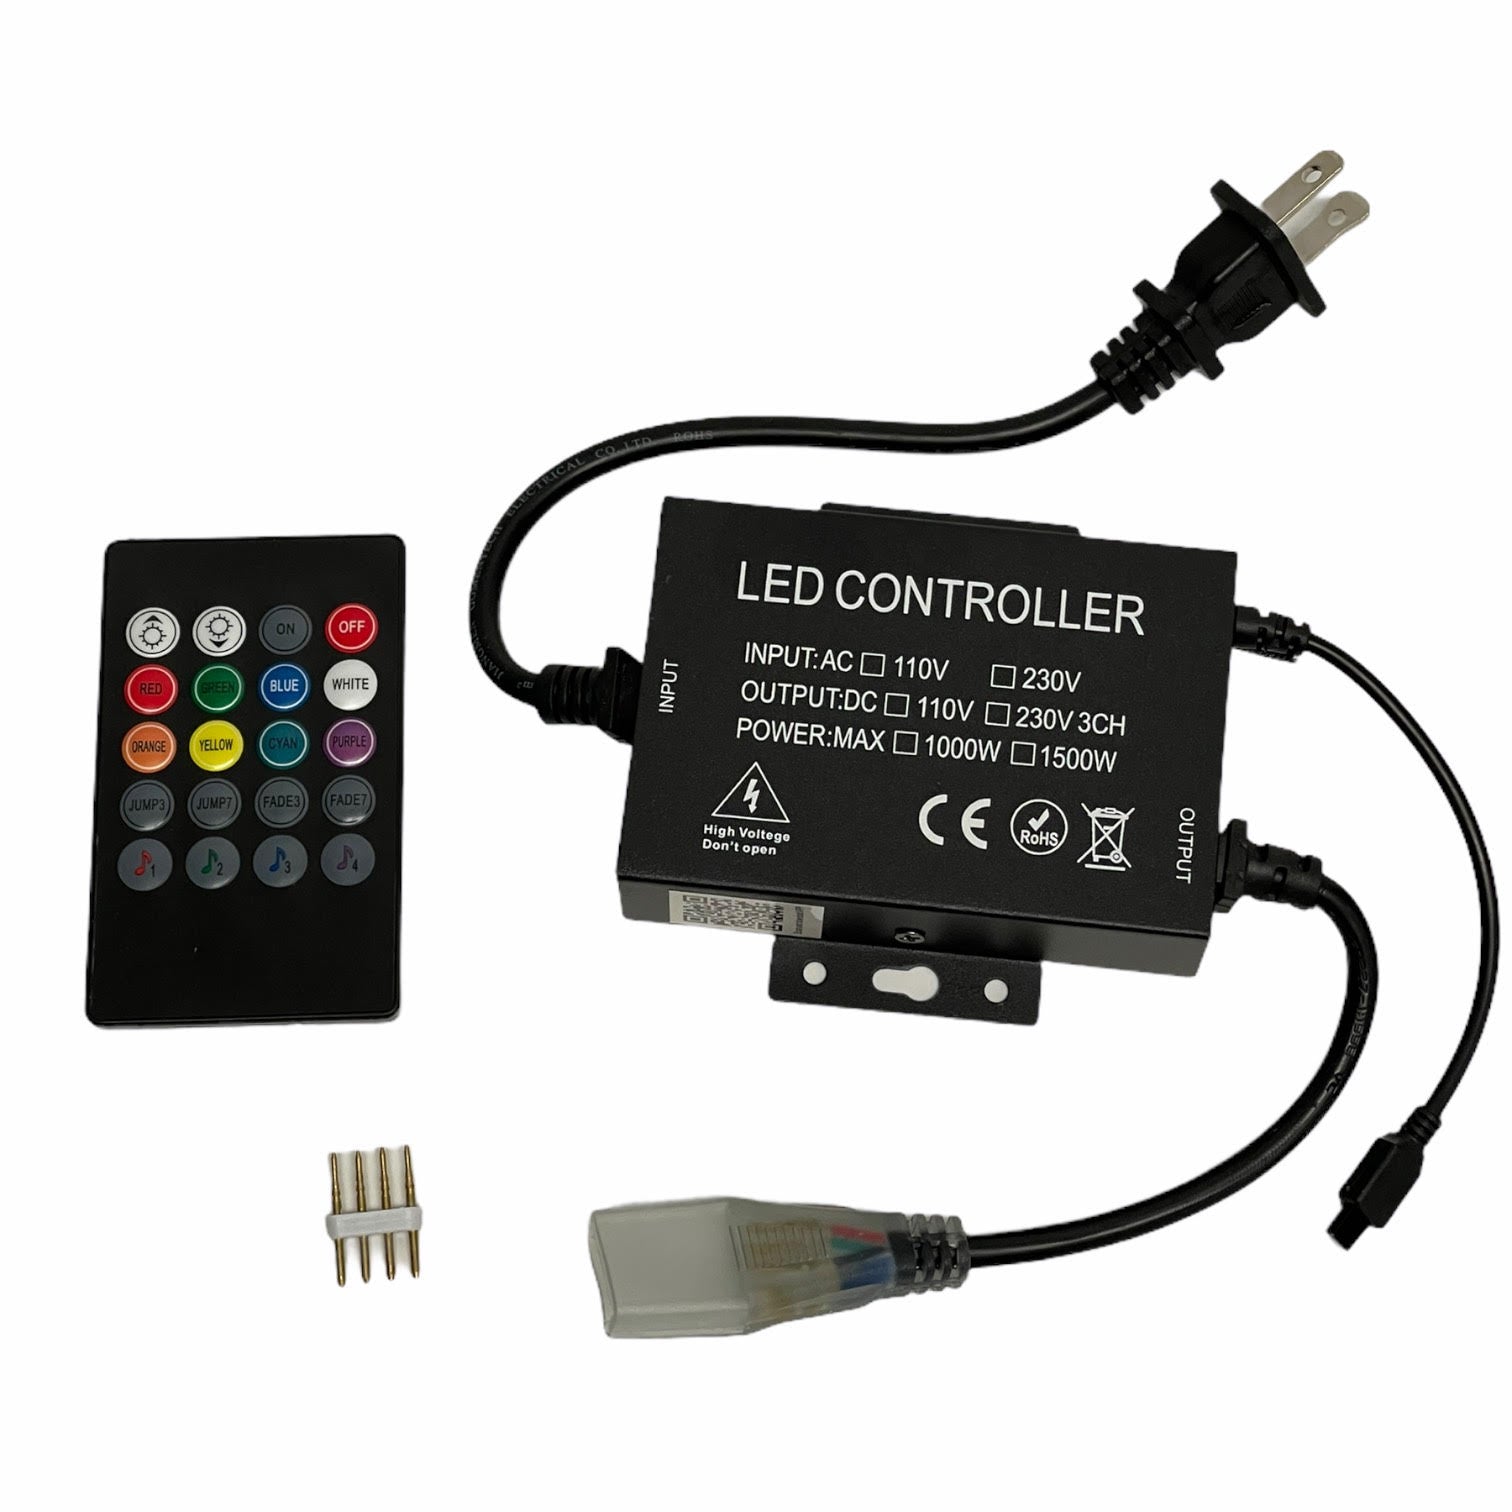 BT-120V Rope Light Remote Control AC 110-240V 1500W Wireless Music IR  Remote Control RGB Controller with 24Key Remote for High Voltage 5050 2835  LED